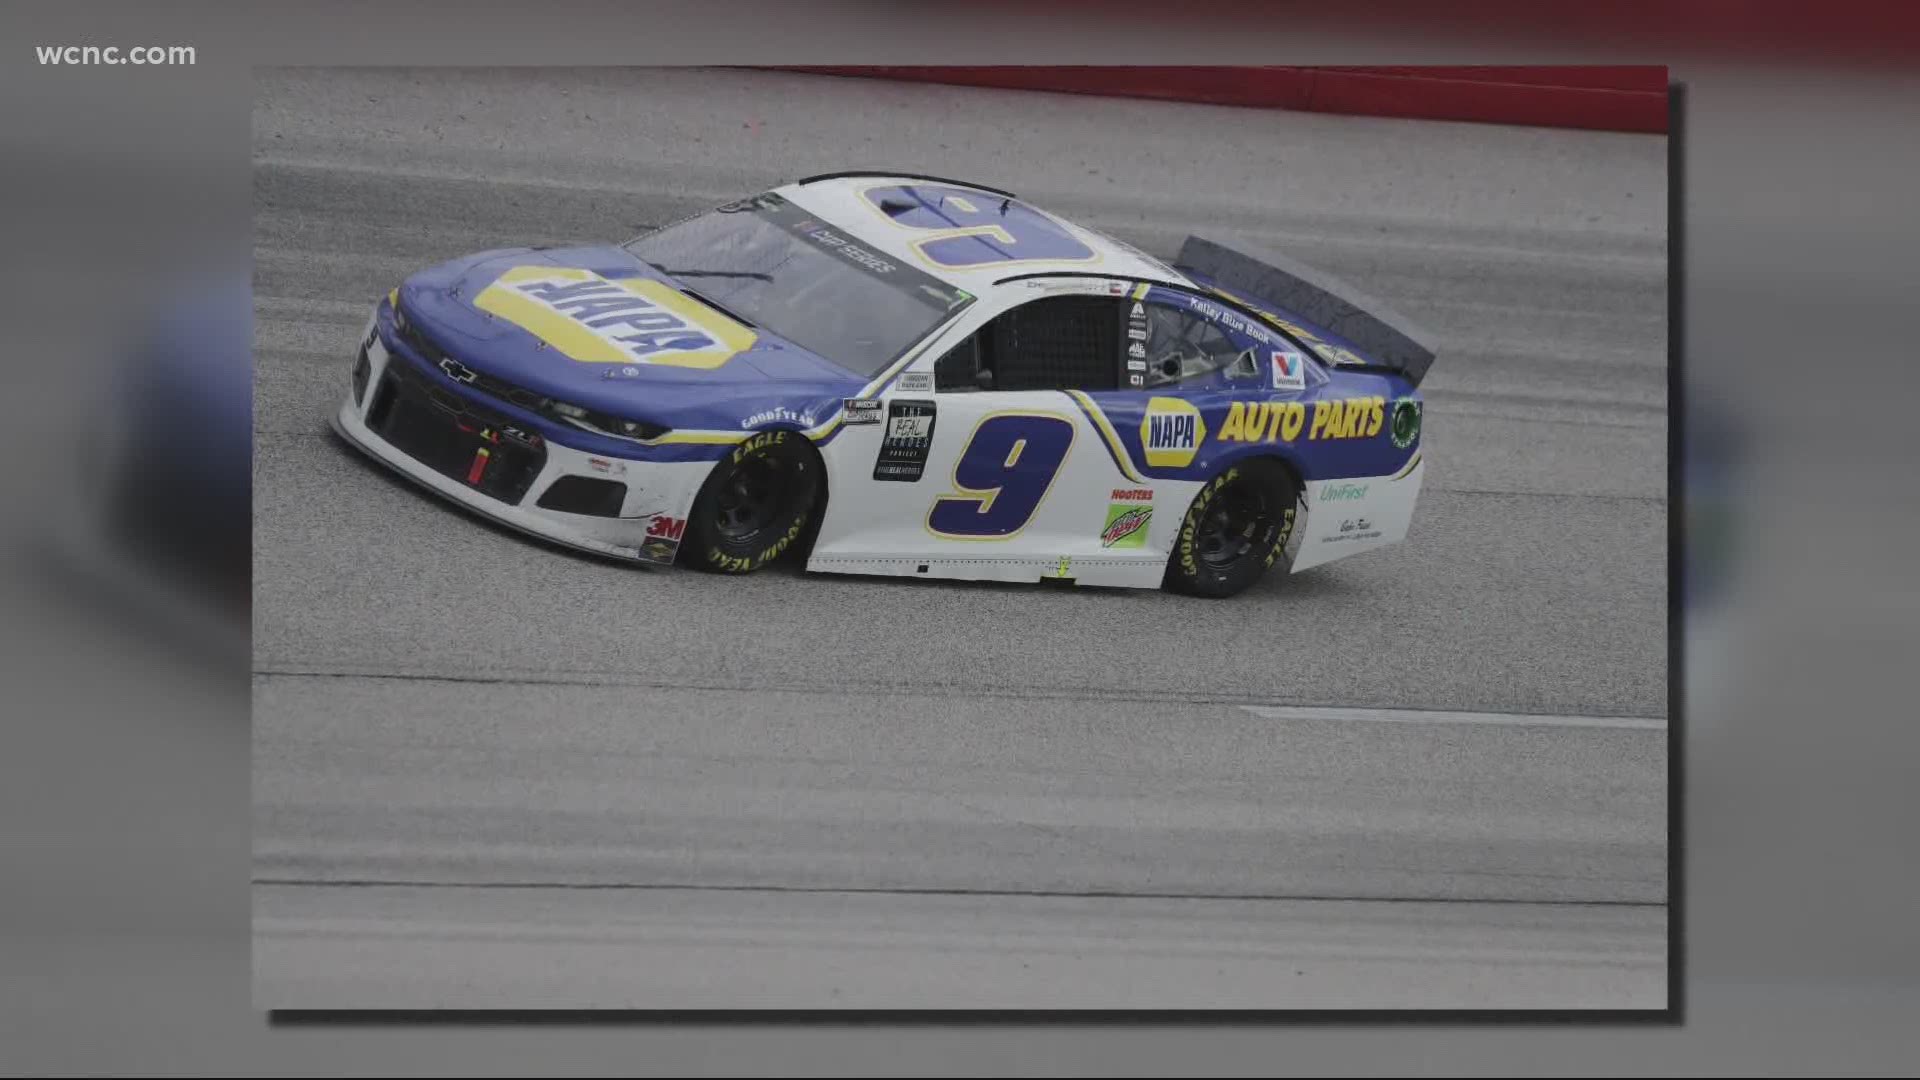 NASCAR driver Chase Elliott recapped his top-five finish at Darlington and discusses what he'll need to score another strong finish this week.